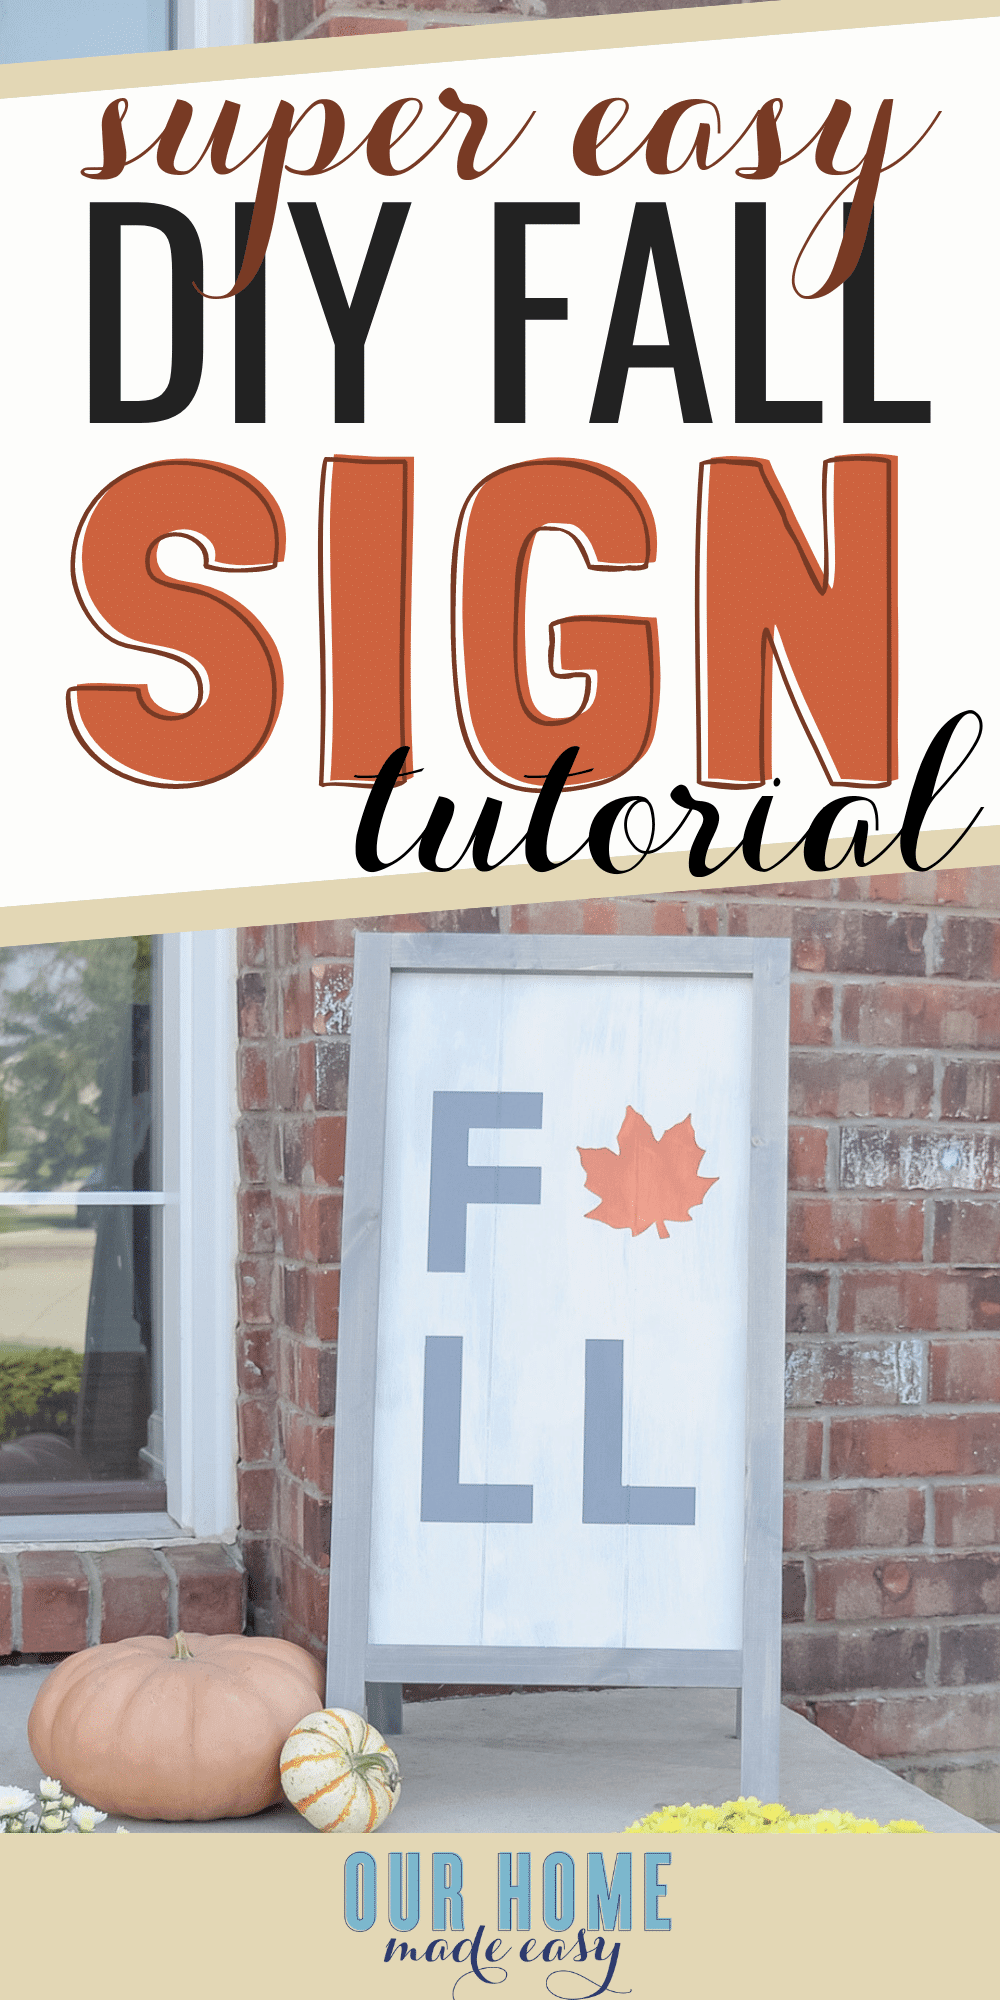 This DIY Fall sign is super easy to make and adds a rustic touch to your Fall front porch decor